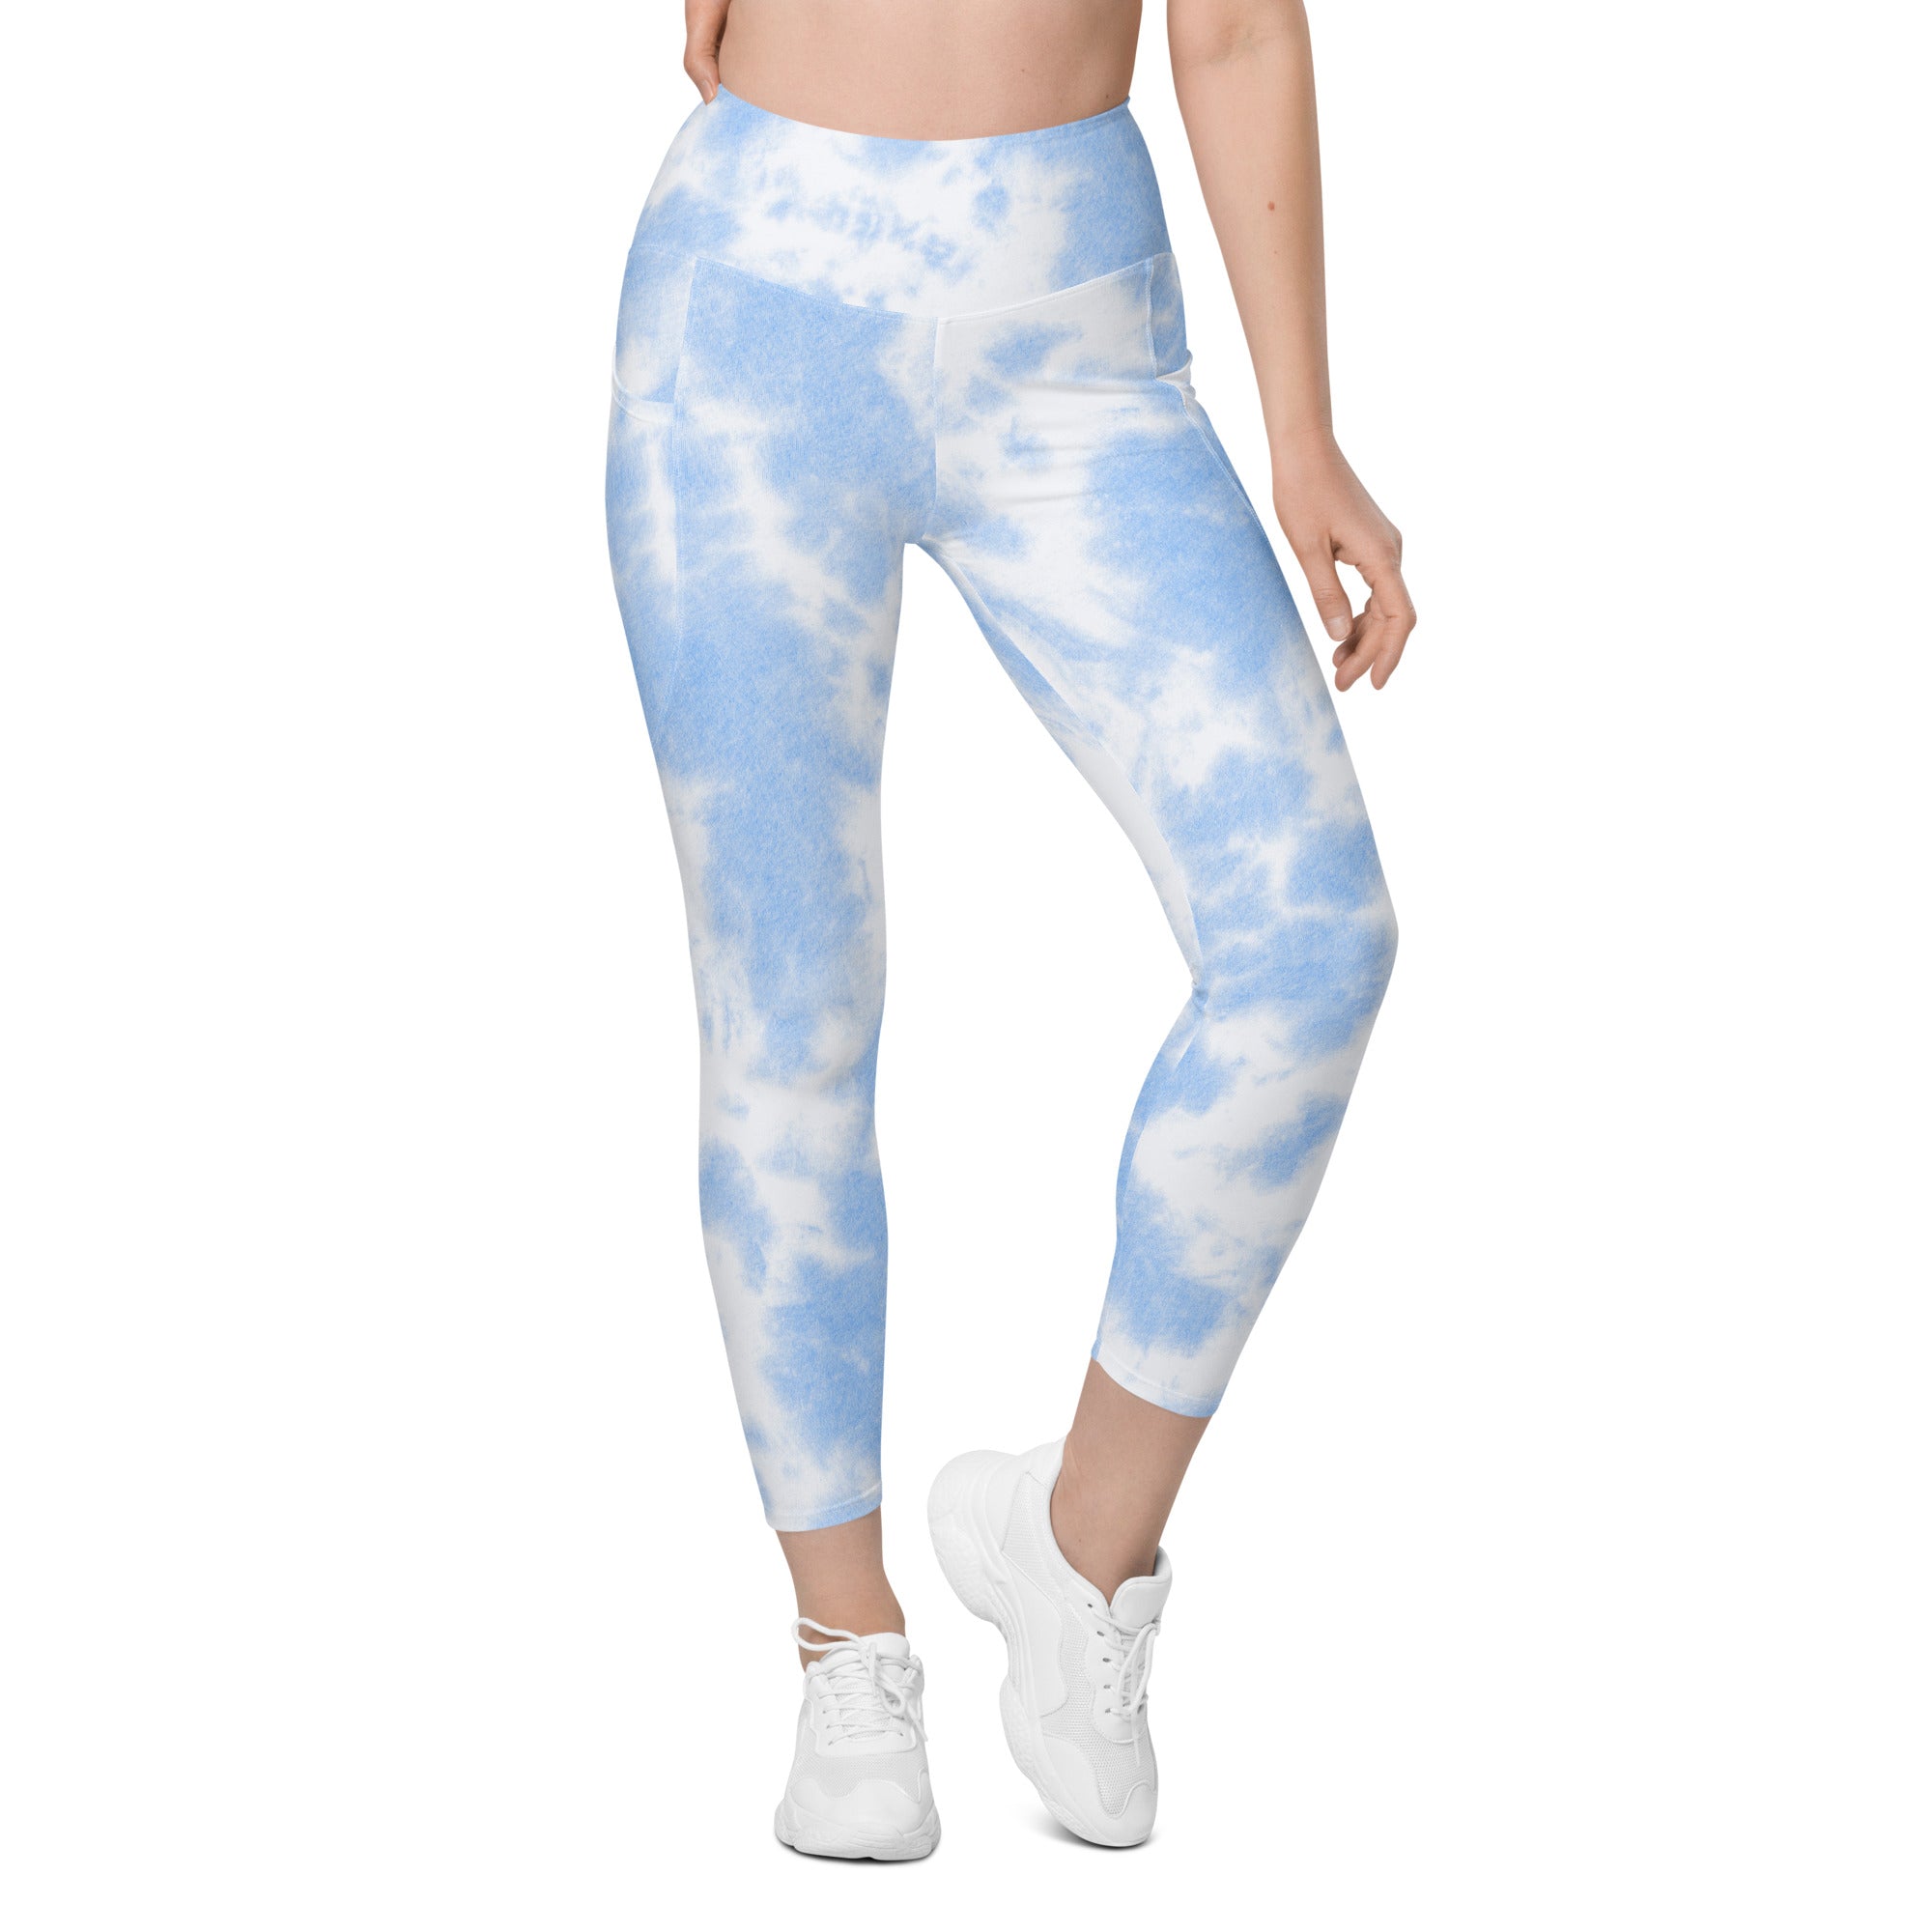 Just Dropped! Chakra 5 Leggings with pockets